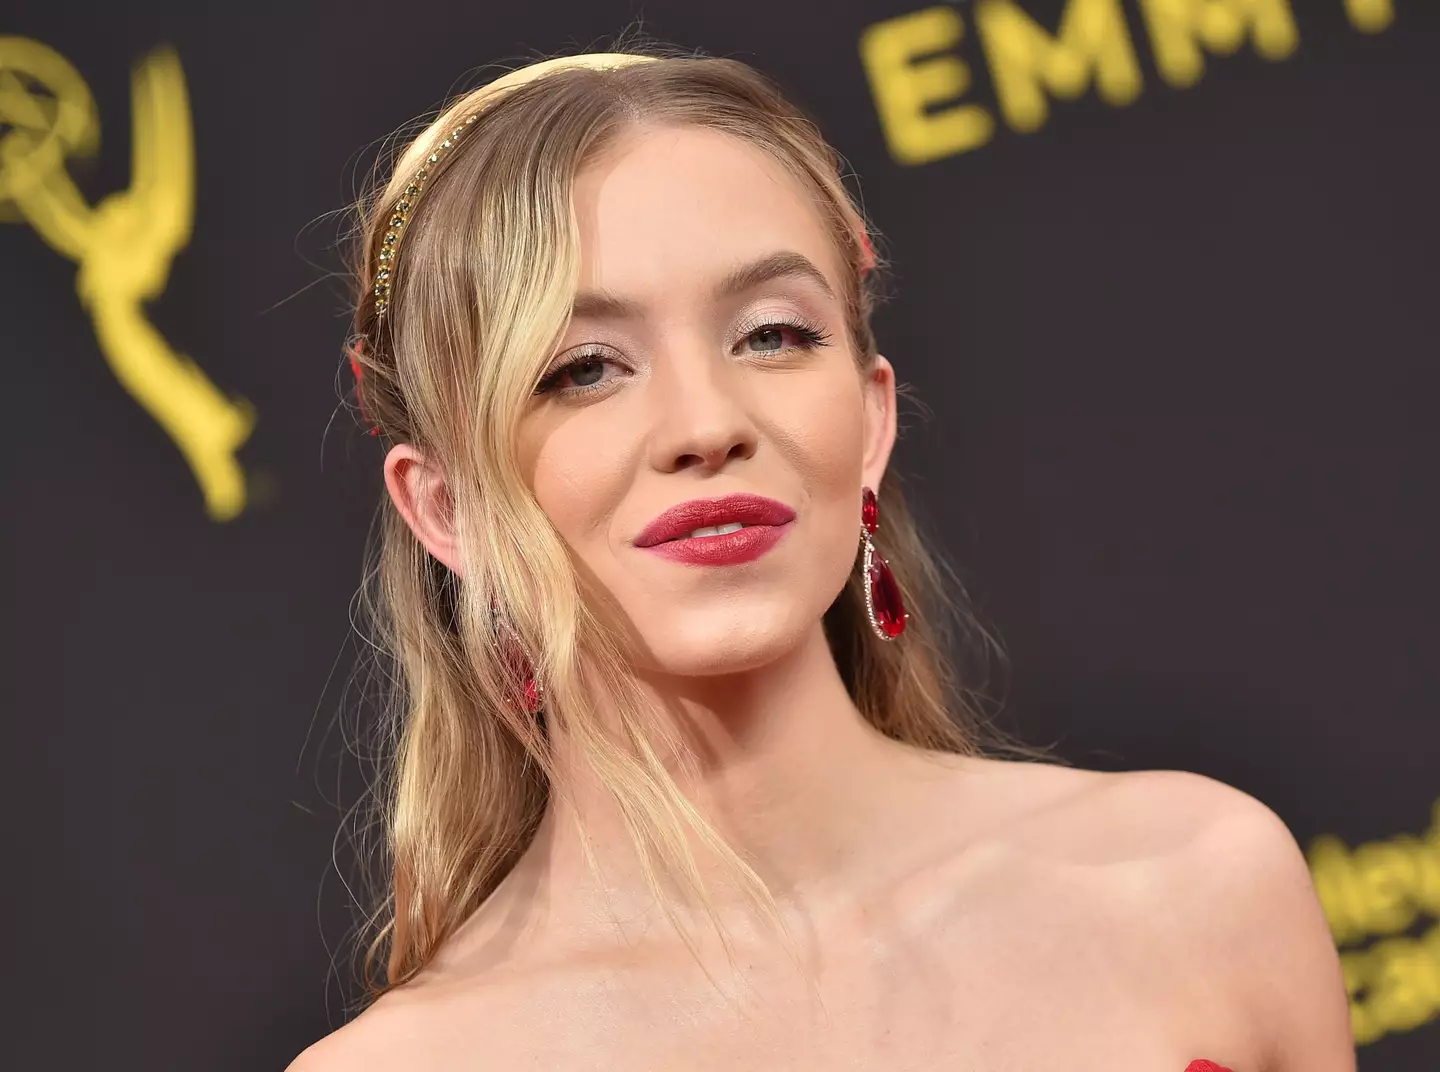 Sydney Sweeney has opened up about bad experiences while filming sex scenes.